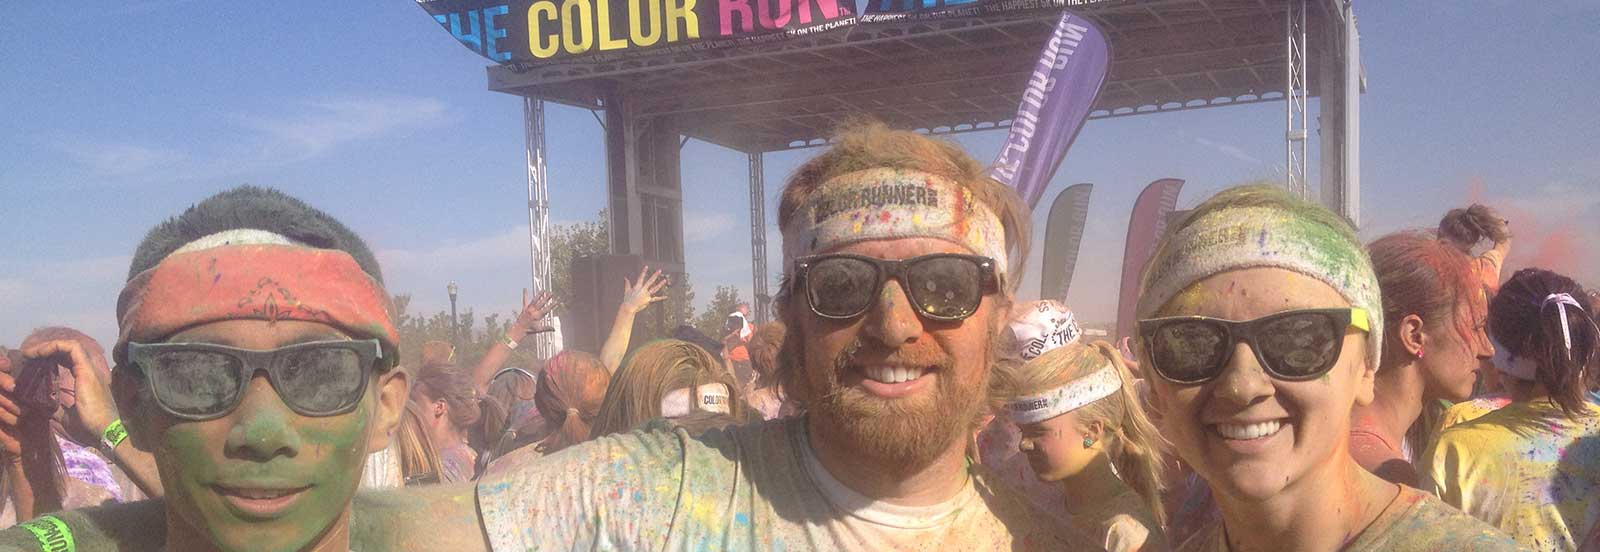 running at the color run